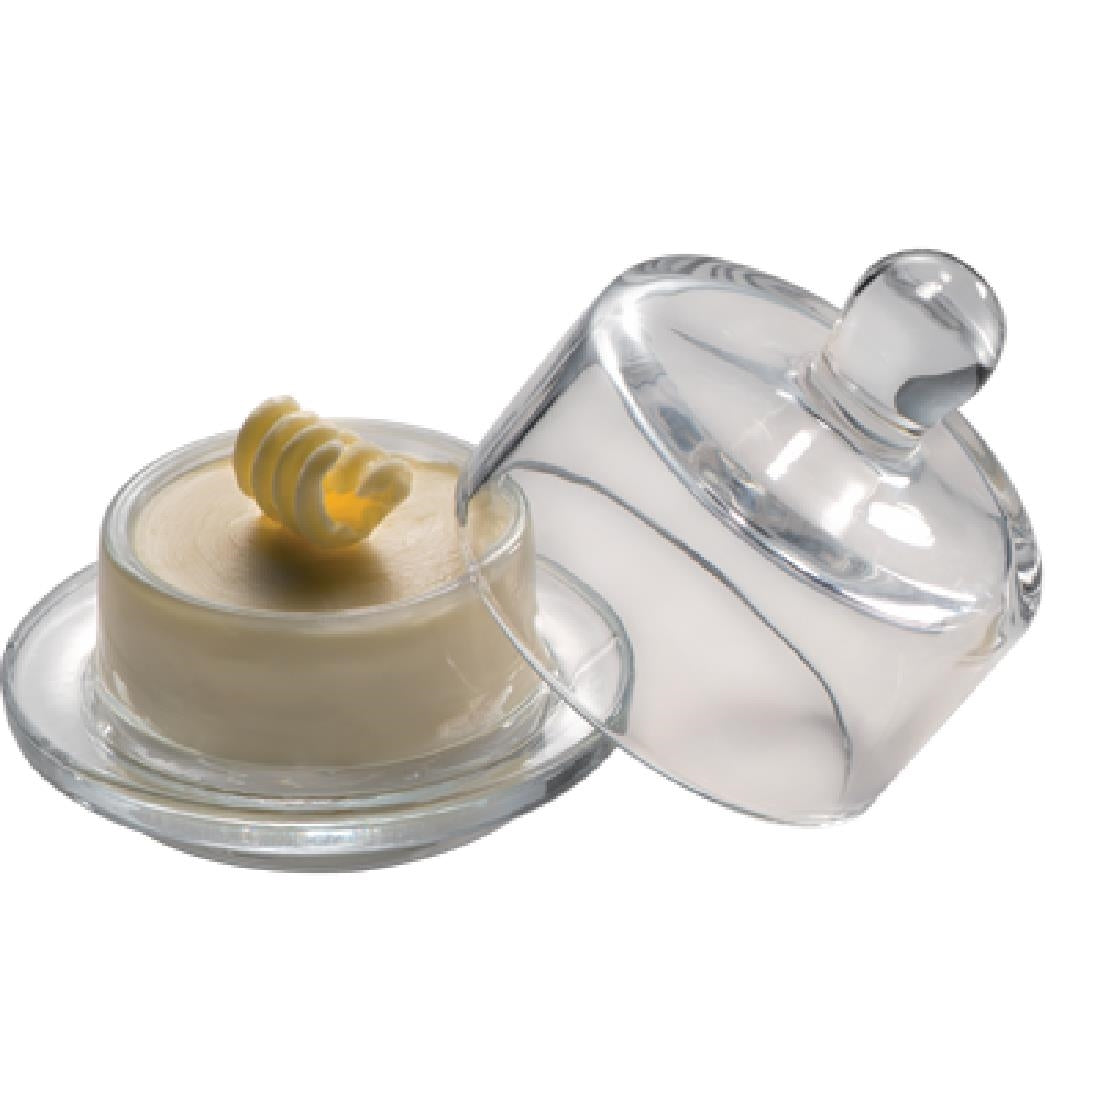 APS Butter Dish Glass Cloche JD Catering Equipment Solutions Ltd